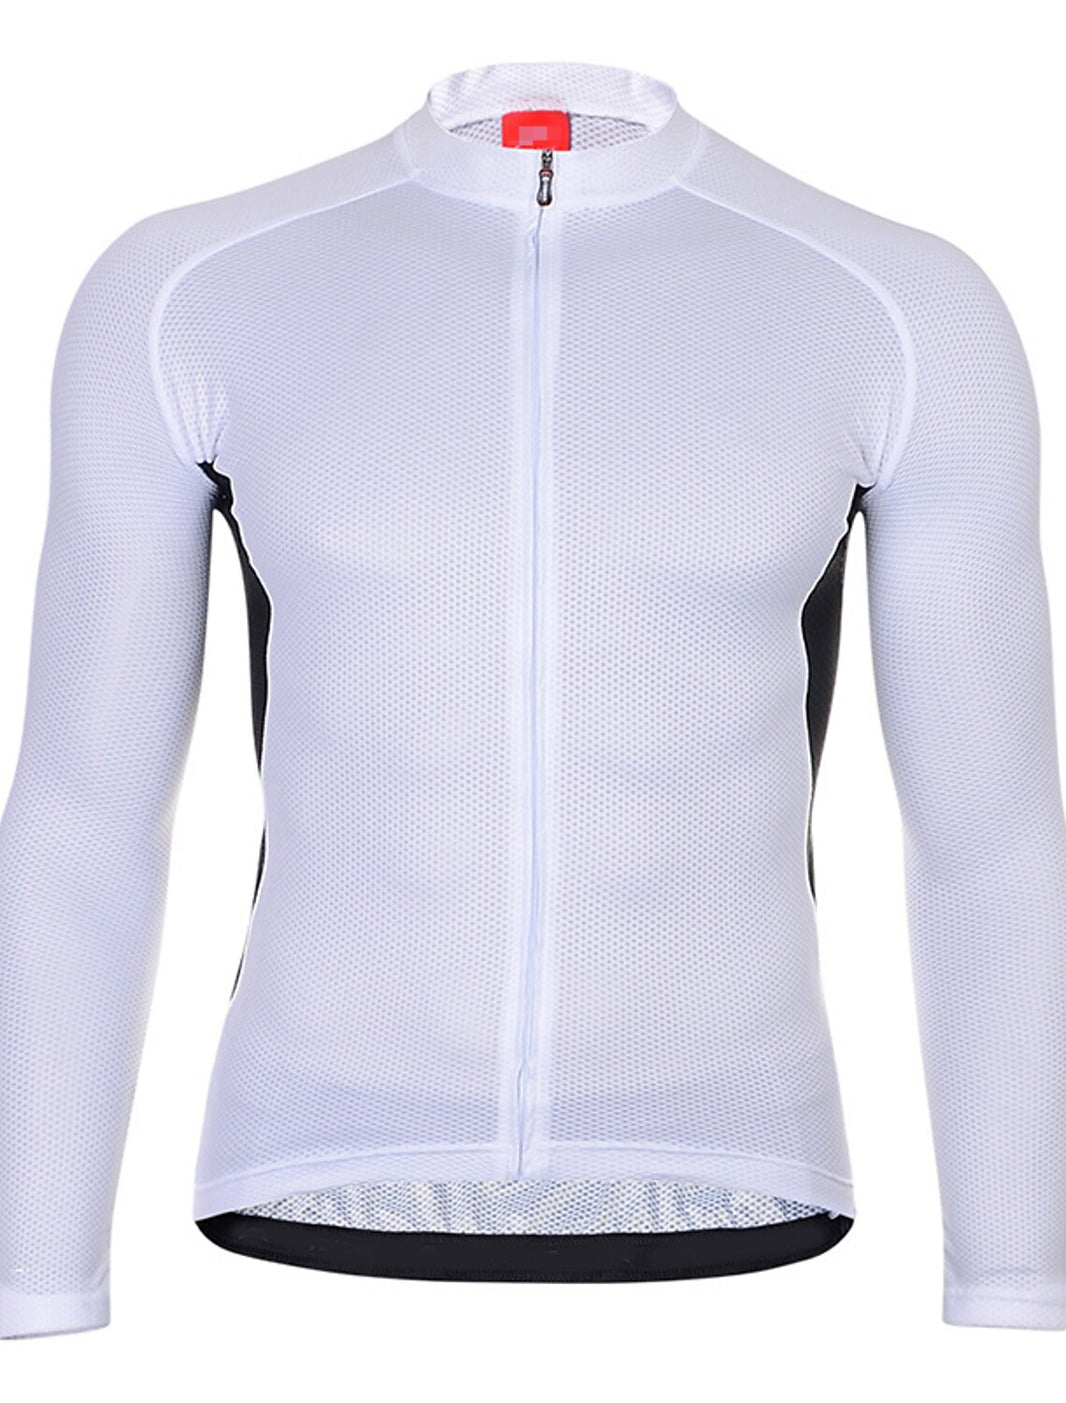 Grams Men's Long Sleeve Cycling Jersey Spandex Polyester